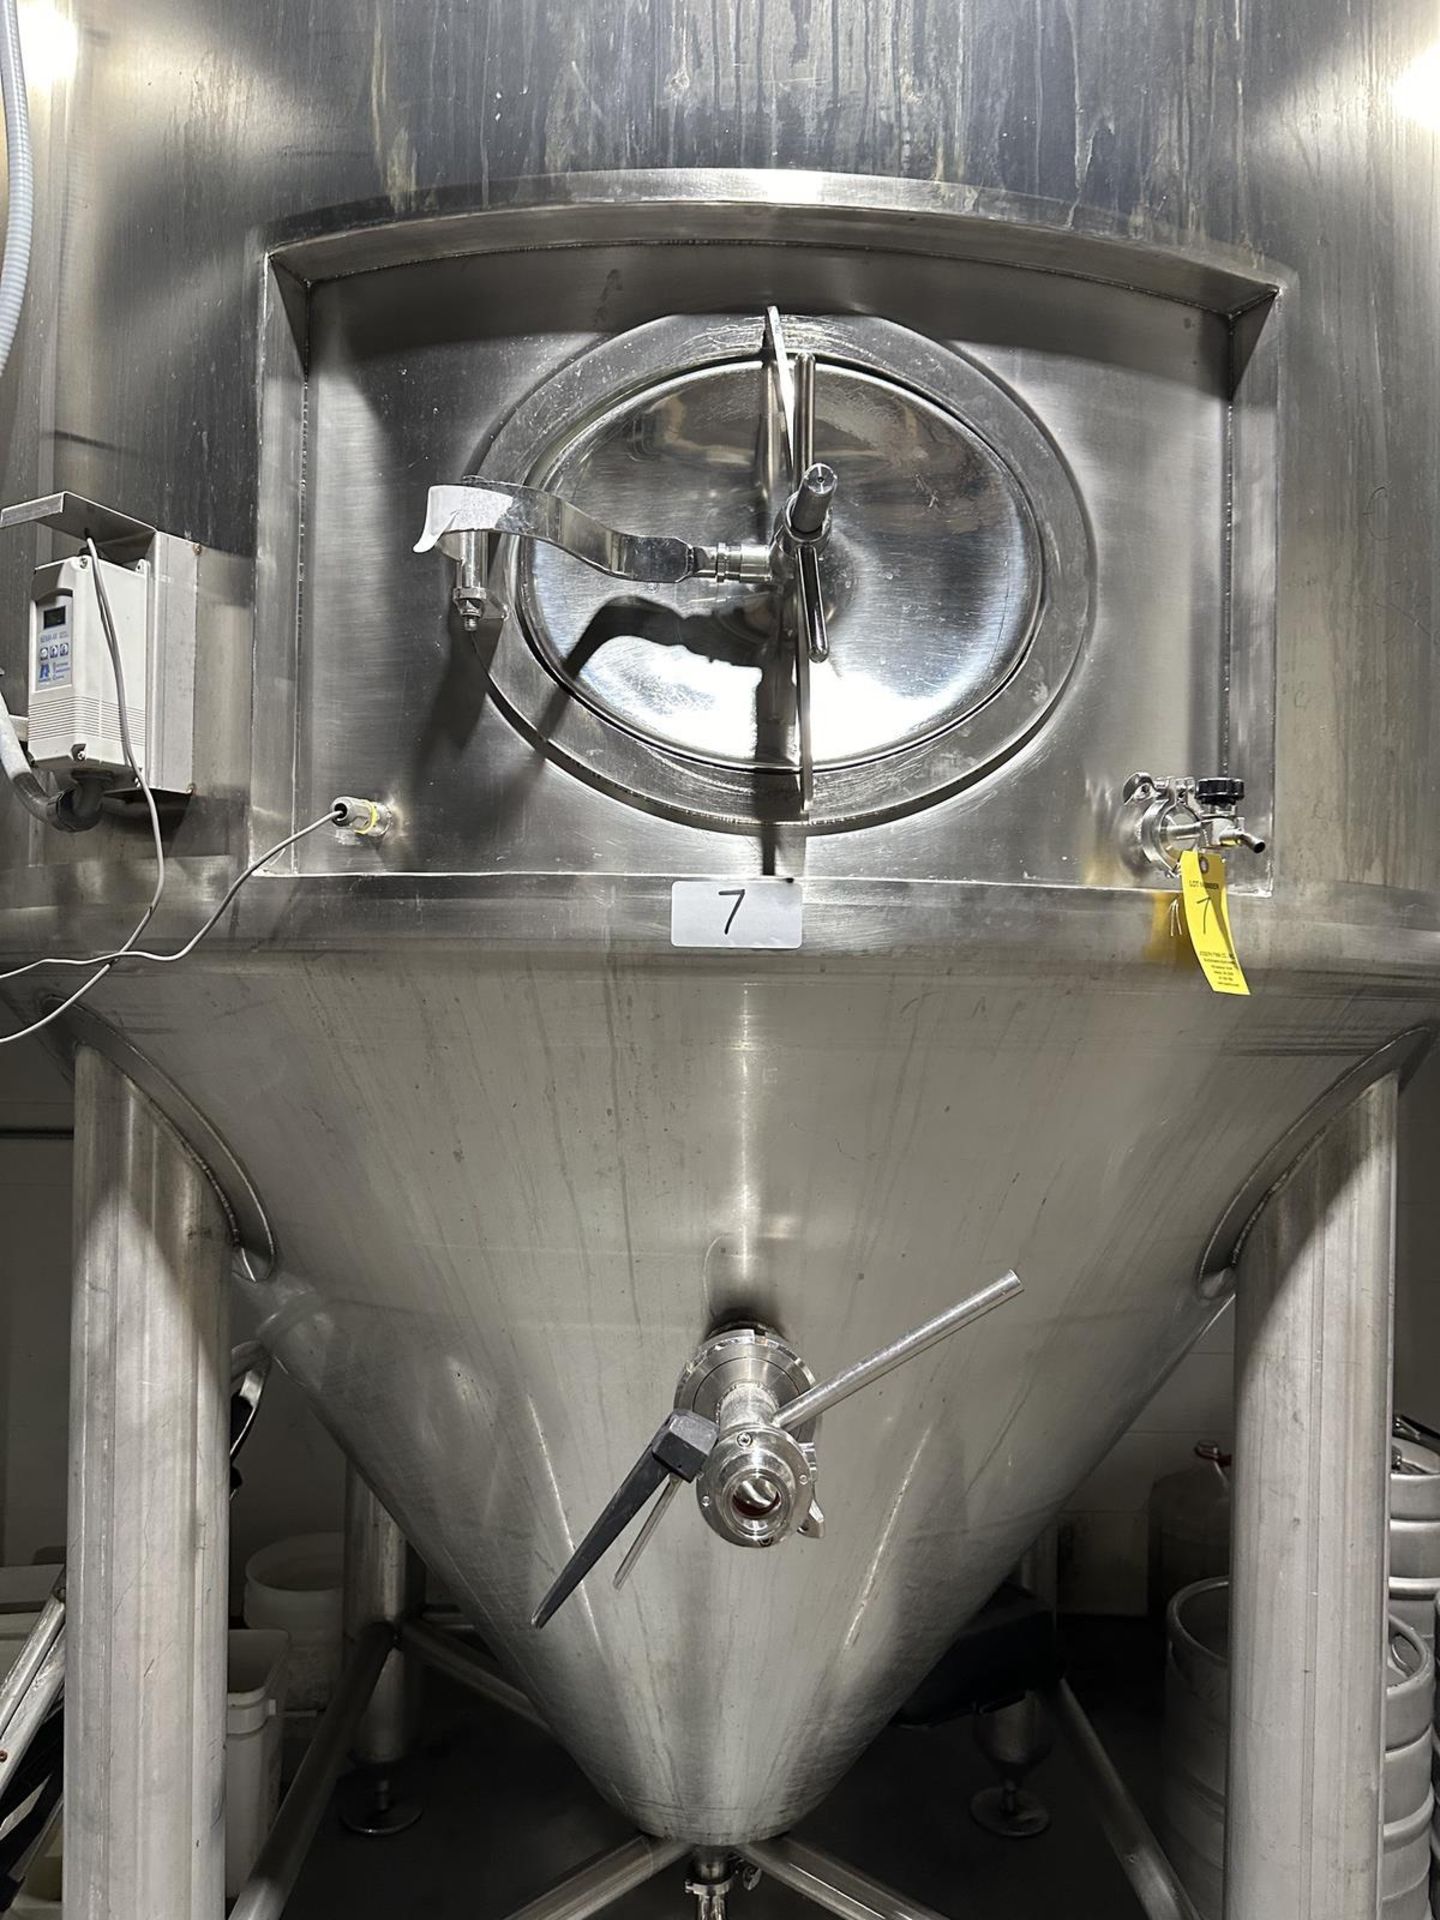 Criveller 60 BBL Stainless Steel Fermenter, Glycol Jacketed, Nema 4X Electronic Tem | Rig Fee $350 - Image 3 of 6